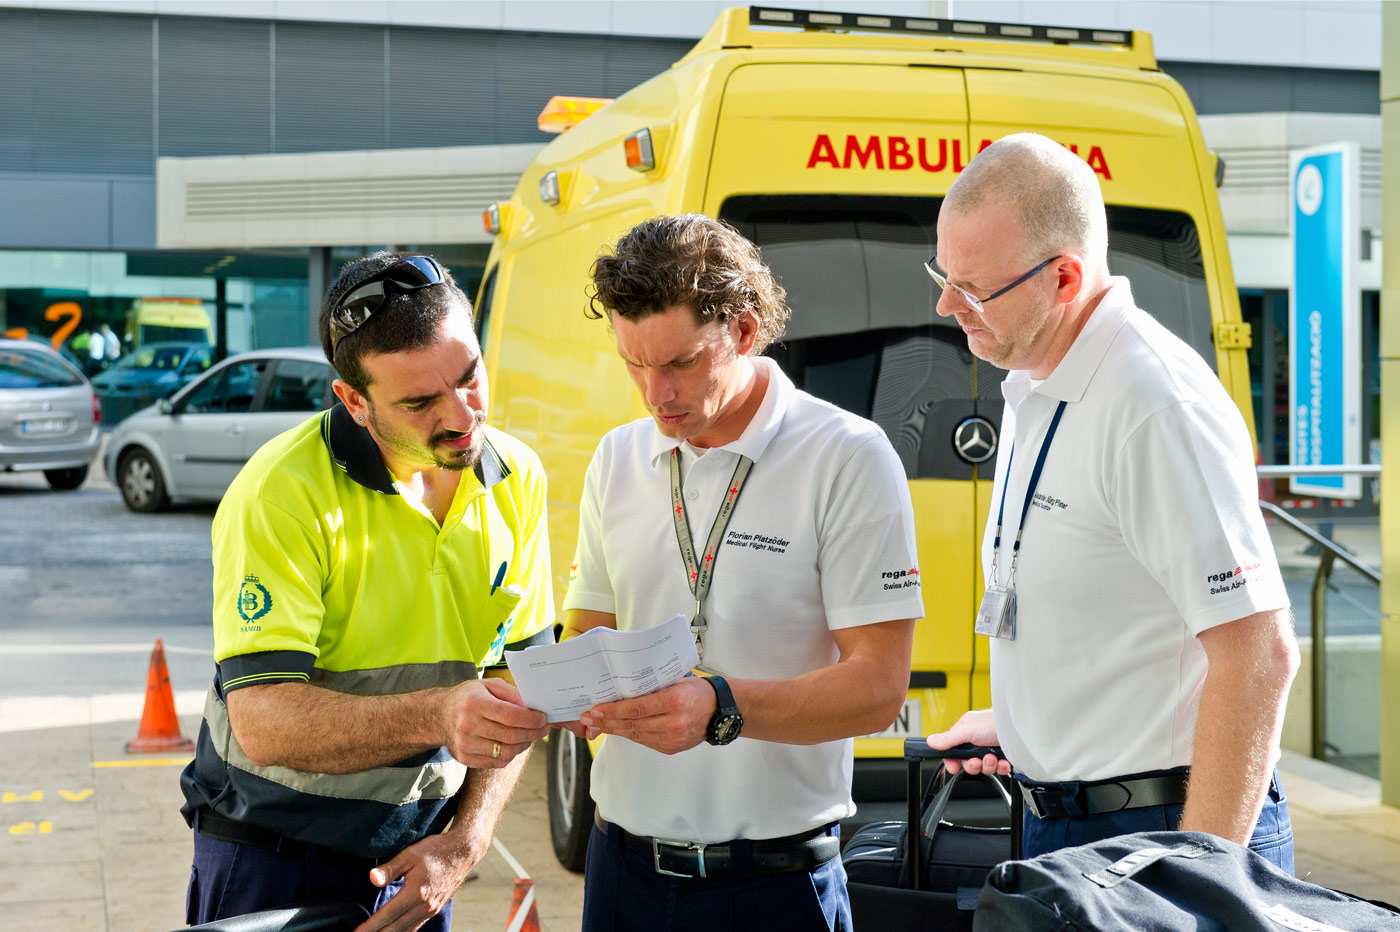 Working in close collaboration with our partner organizations, e.g. ground ambulance, Palma de Mallorca, Spain, 2012